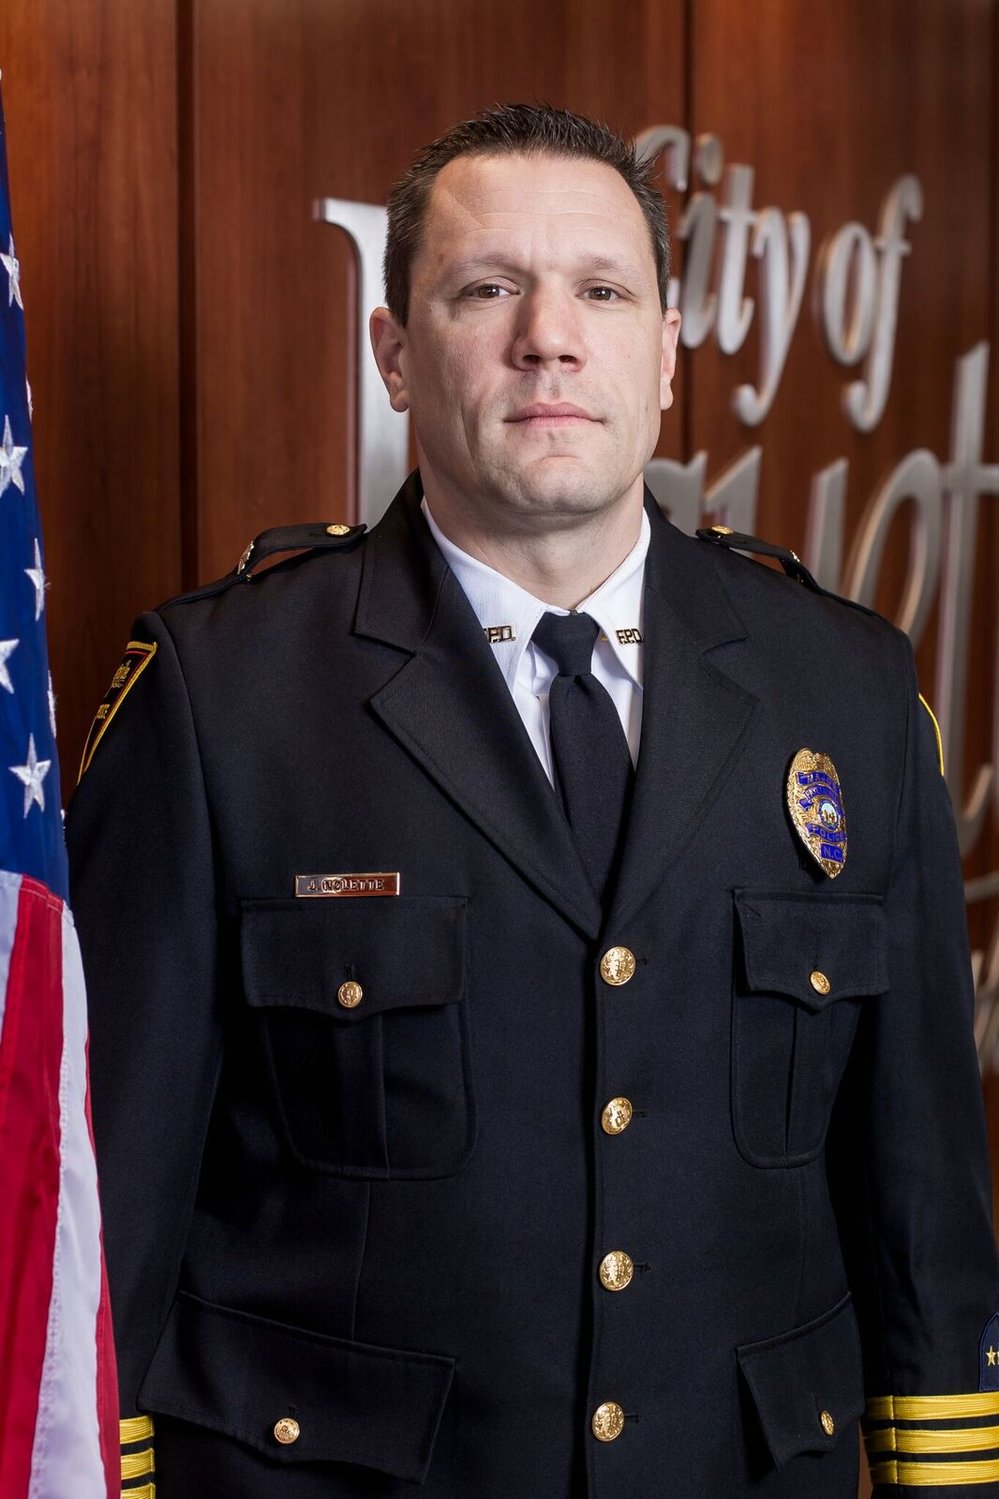 Assistant Chief James Nolette commands the Specialized Services Bureau, which is comprised of various units in training and professional development, field operations support, the Community Resources Division, Specialized Operations, Central Record and the Technical Support Division.